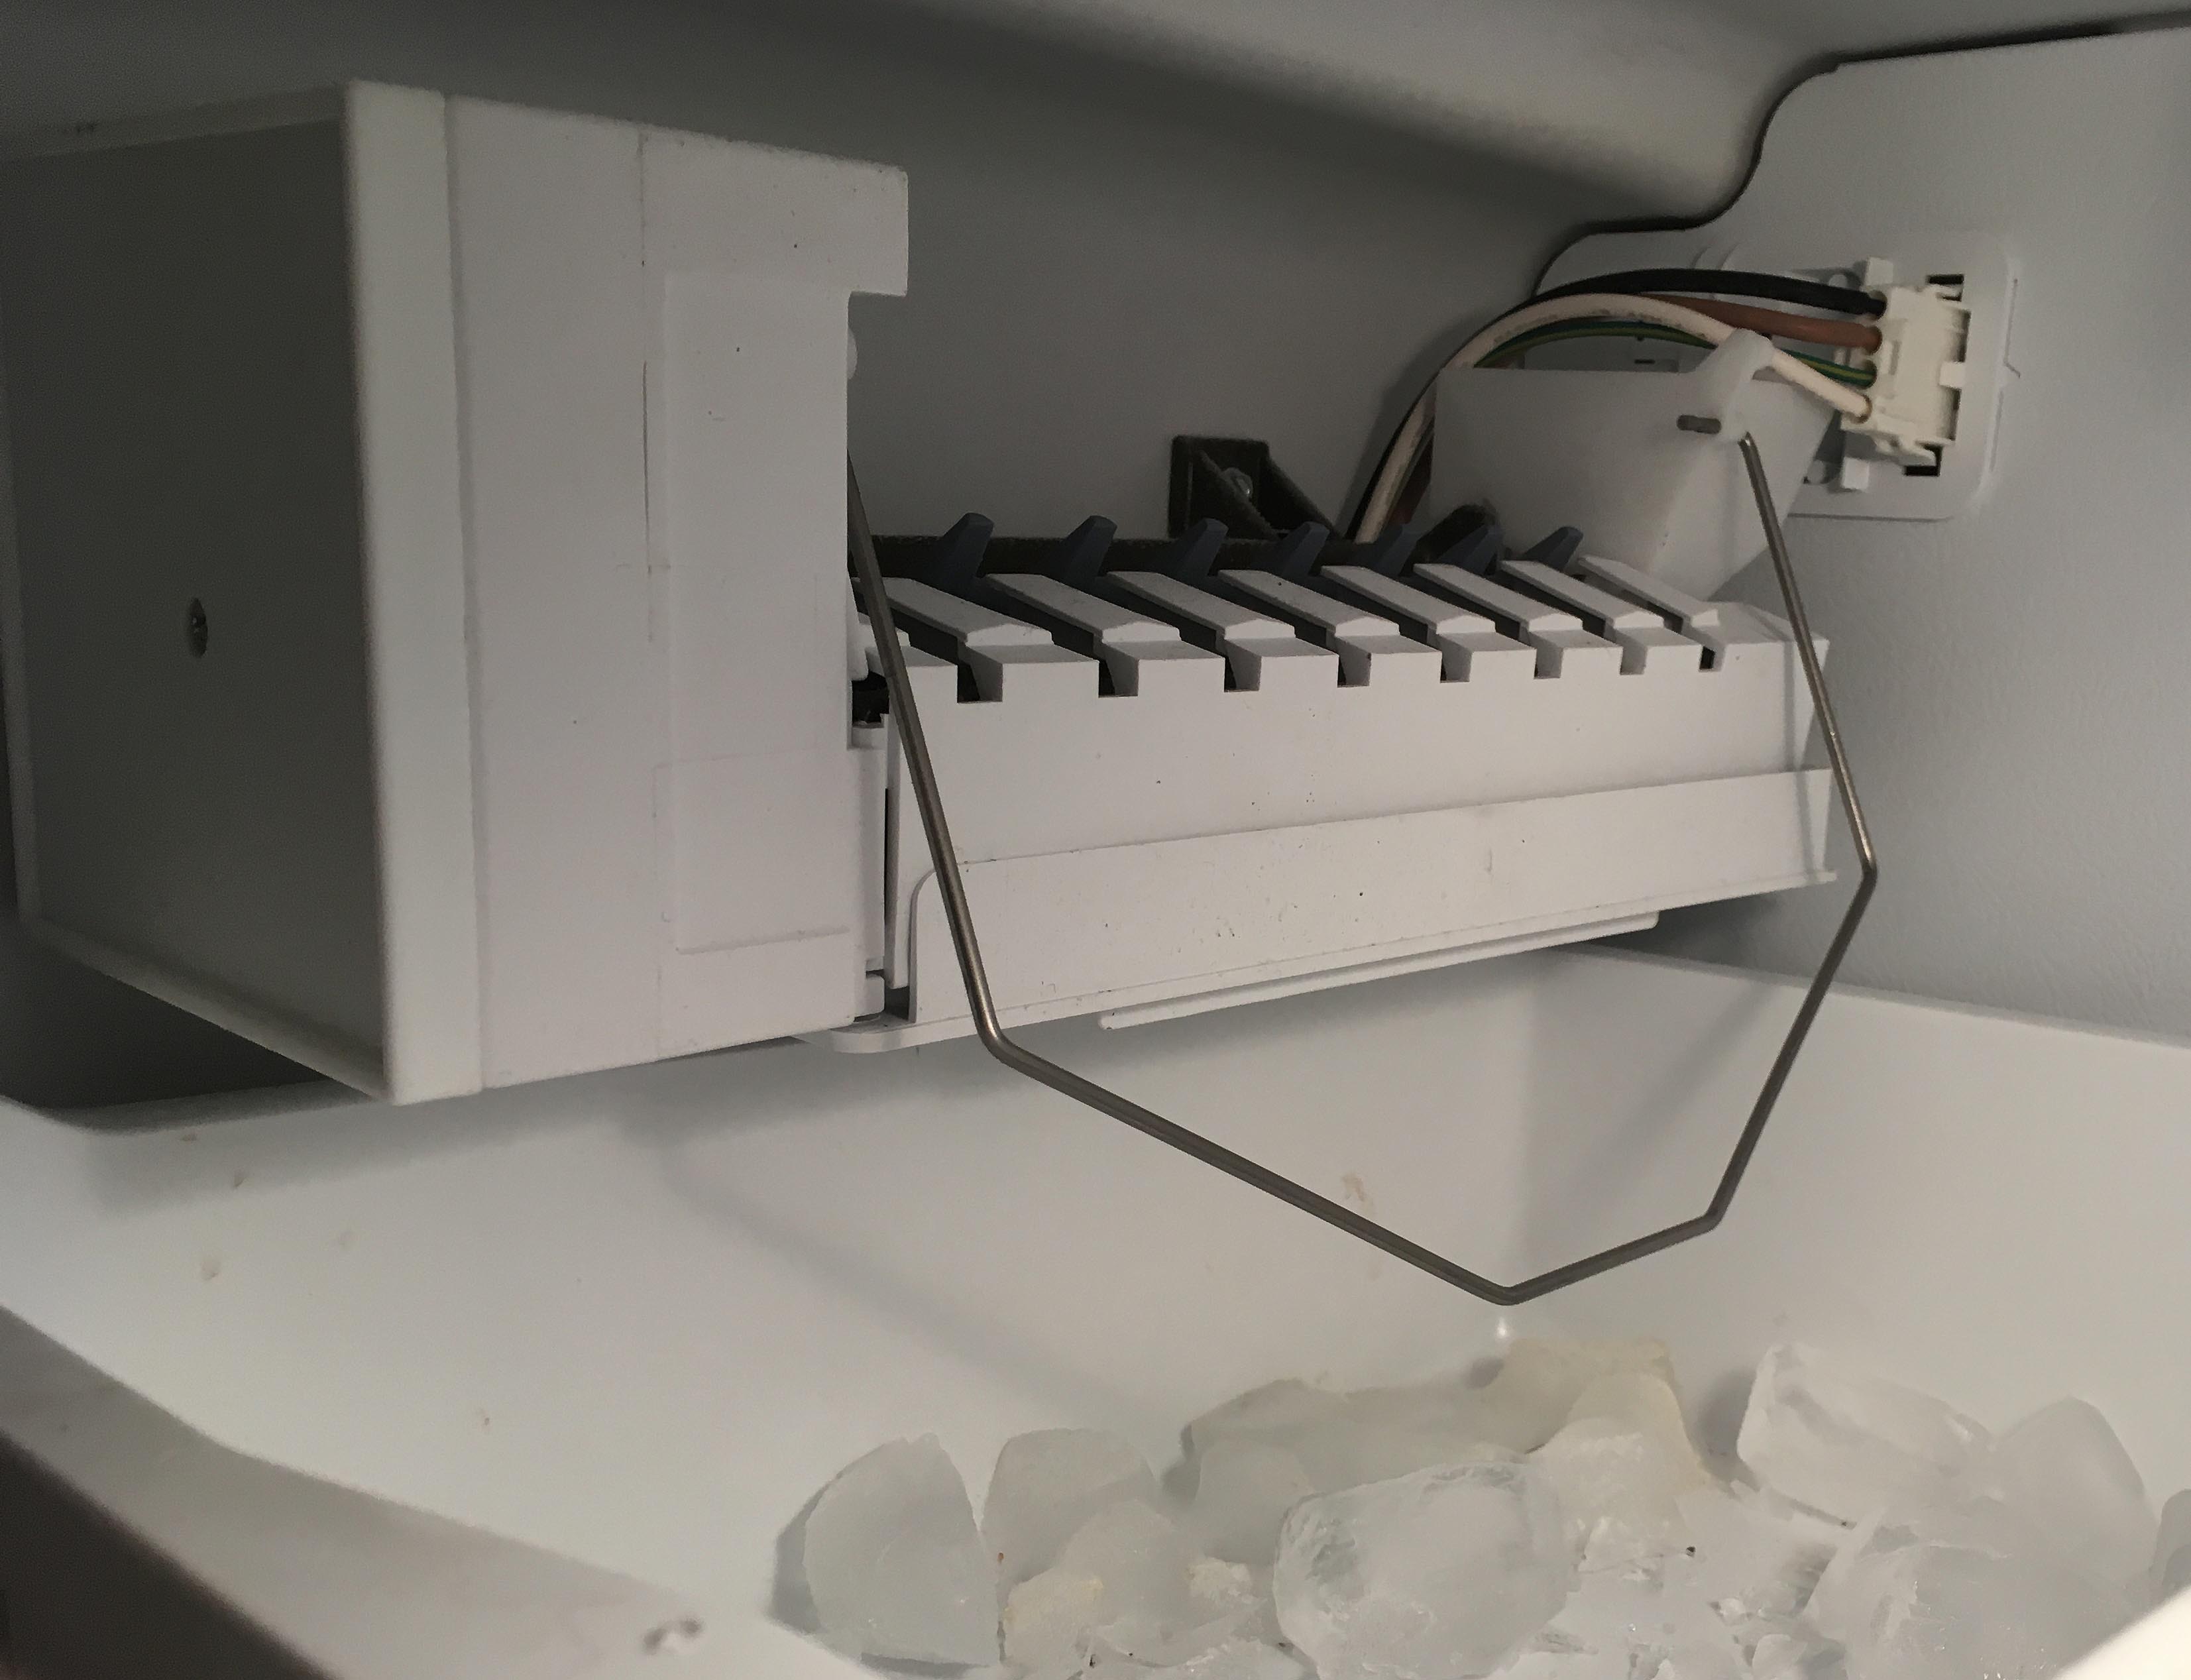 Troubleshooting Your Icemaker